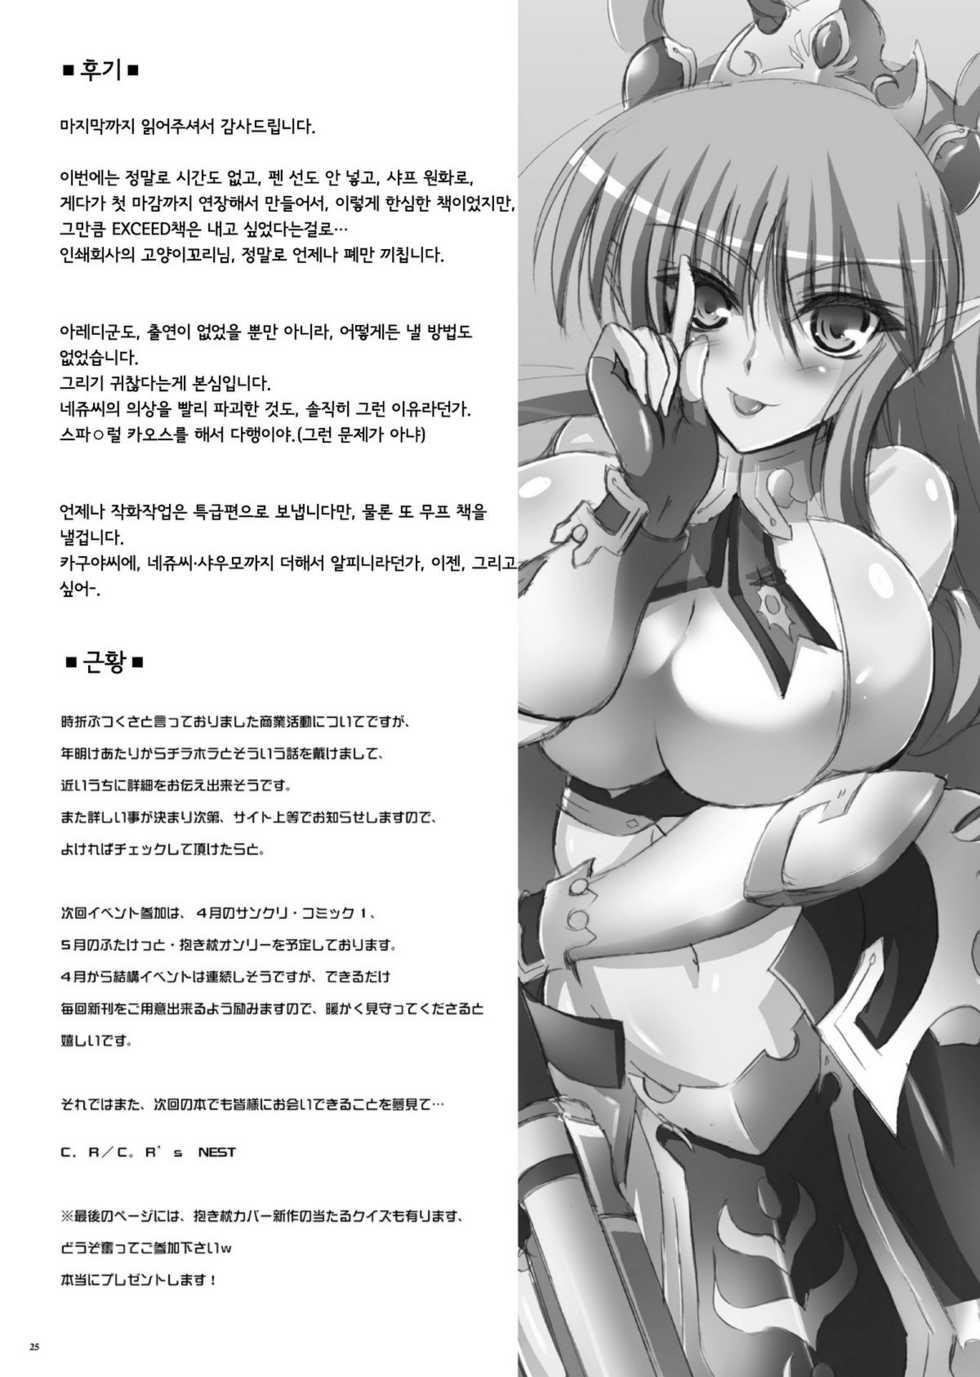 [C.R`s NEST] EXCEED CHARGE!! (Super Robot Wars) (korean) - Page 25